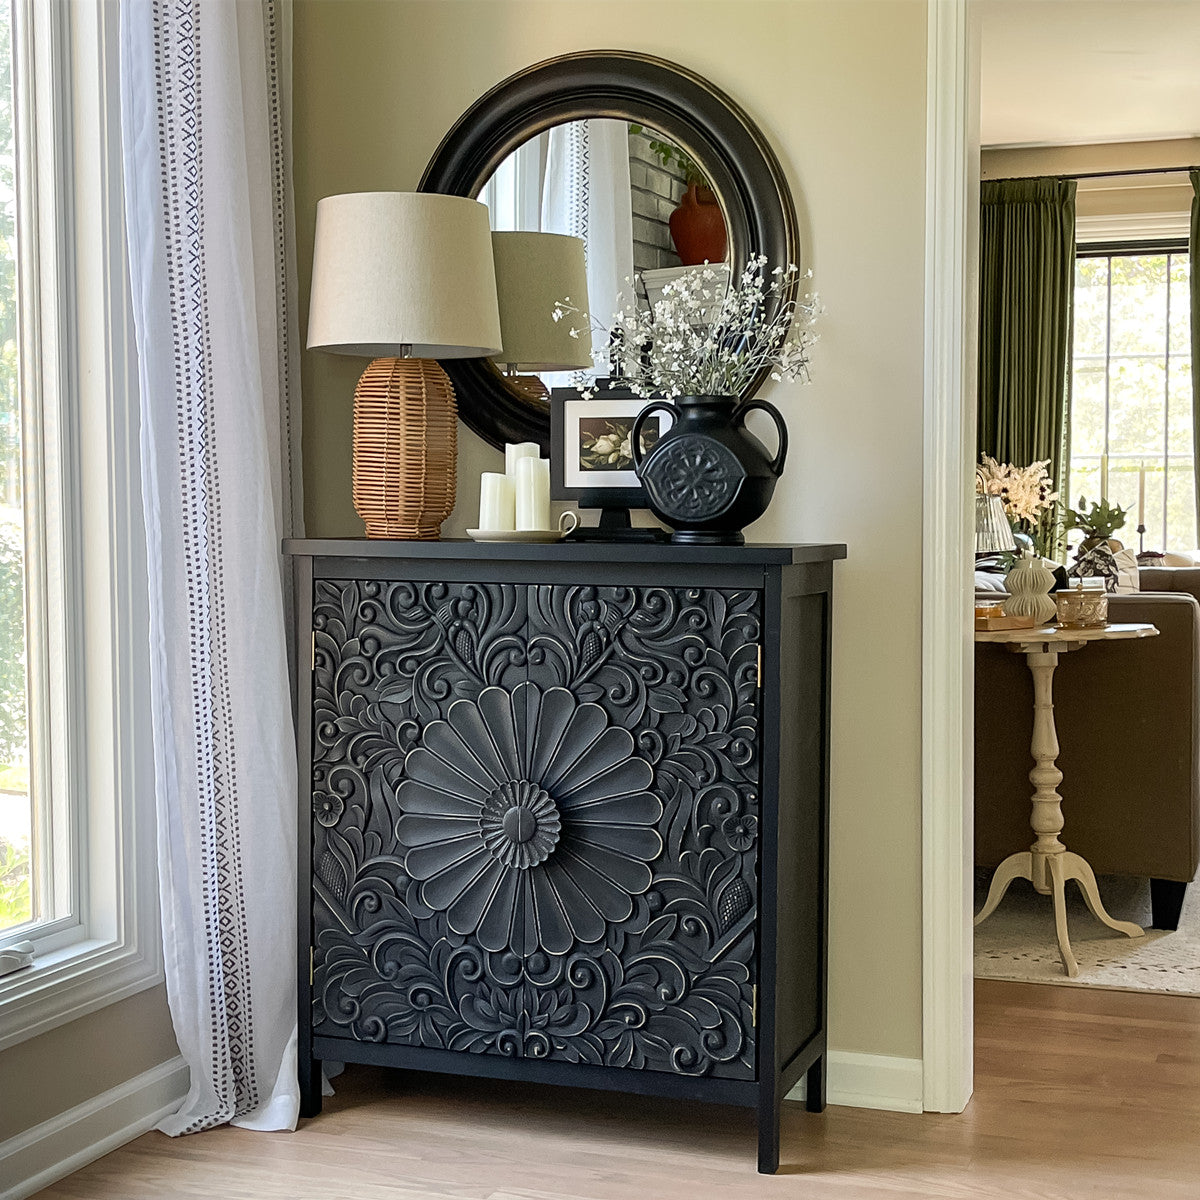 Buy Black Accent Cabinet for your home at AlphaMarts. Free Shipping & 1-Year Warranty.